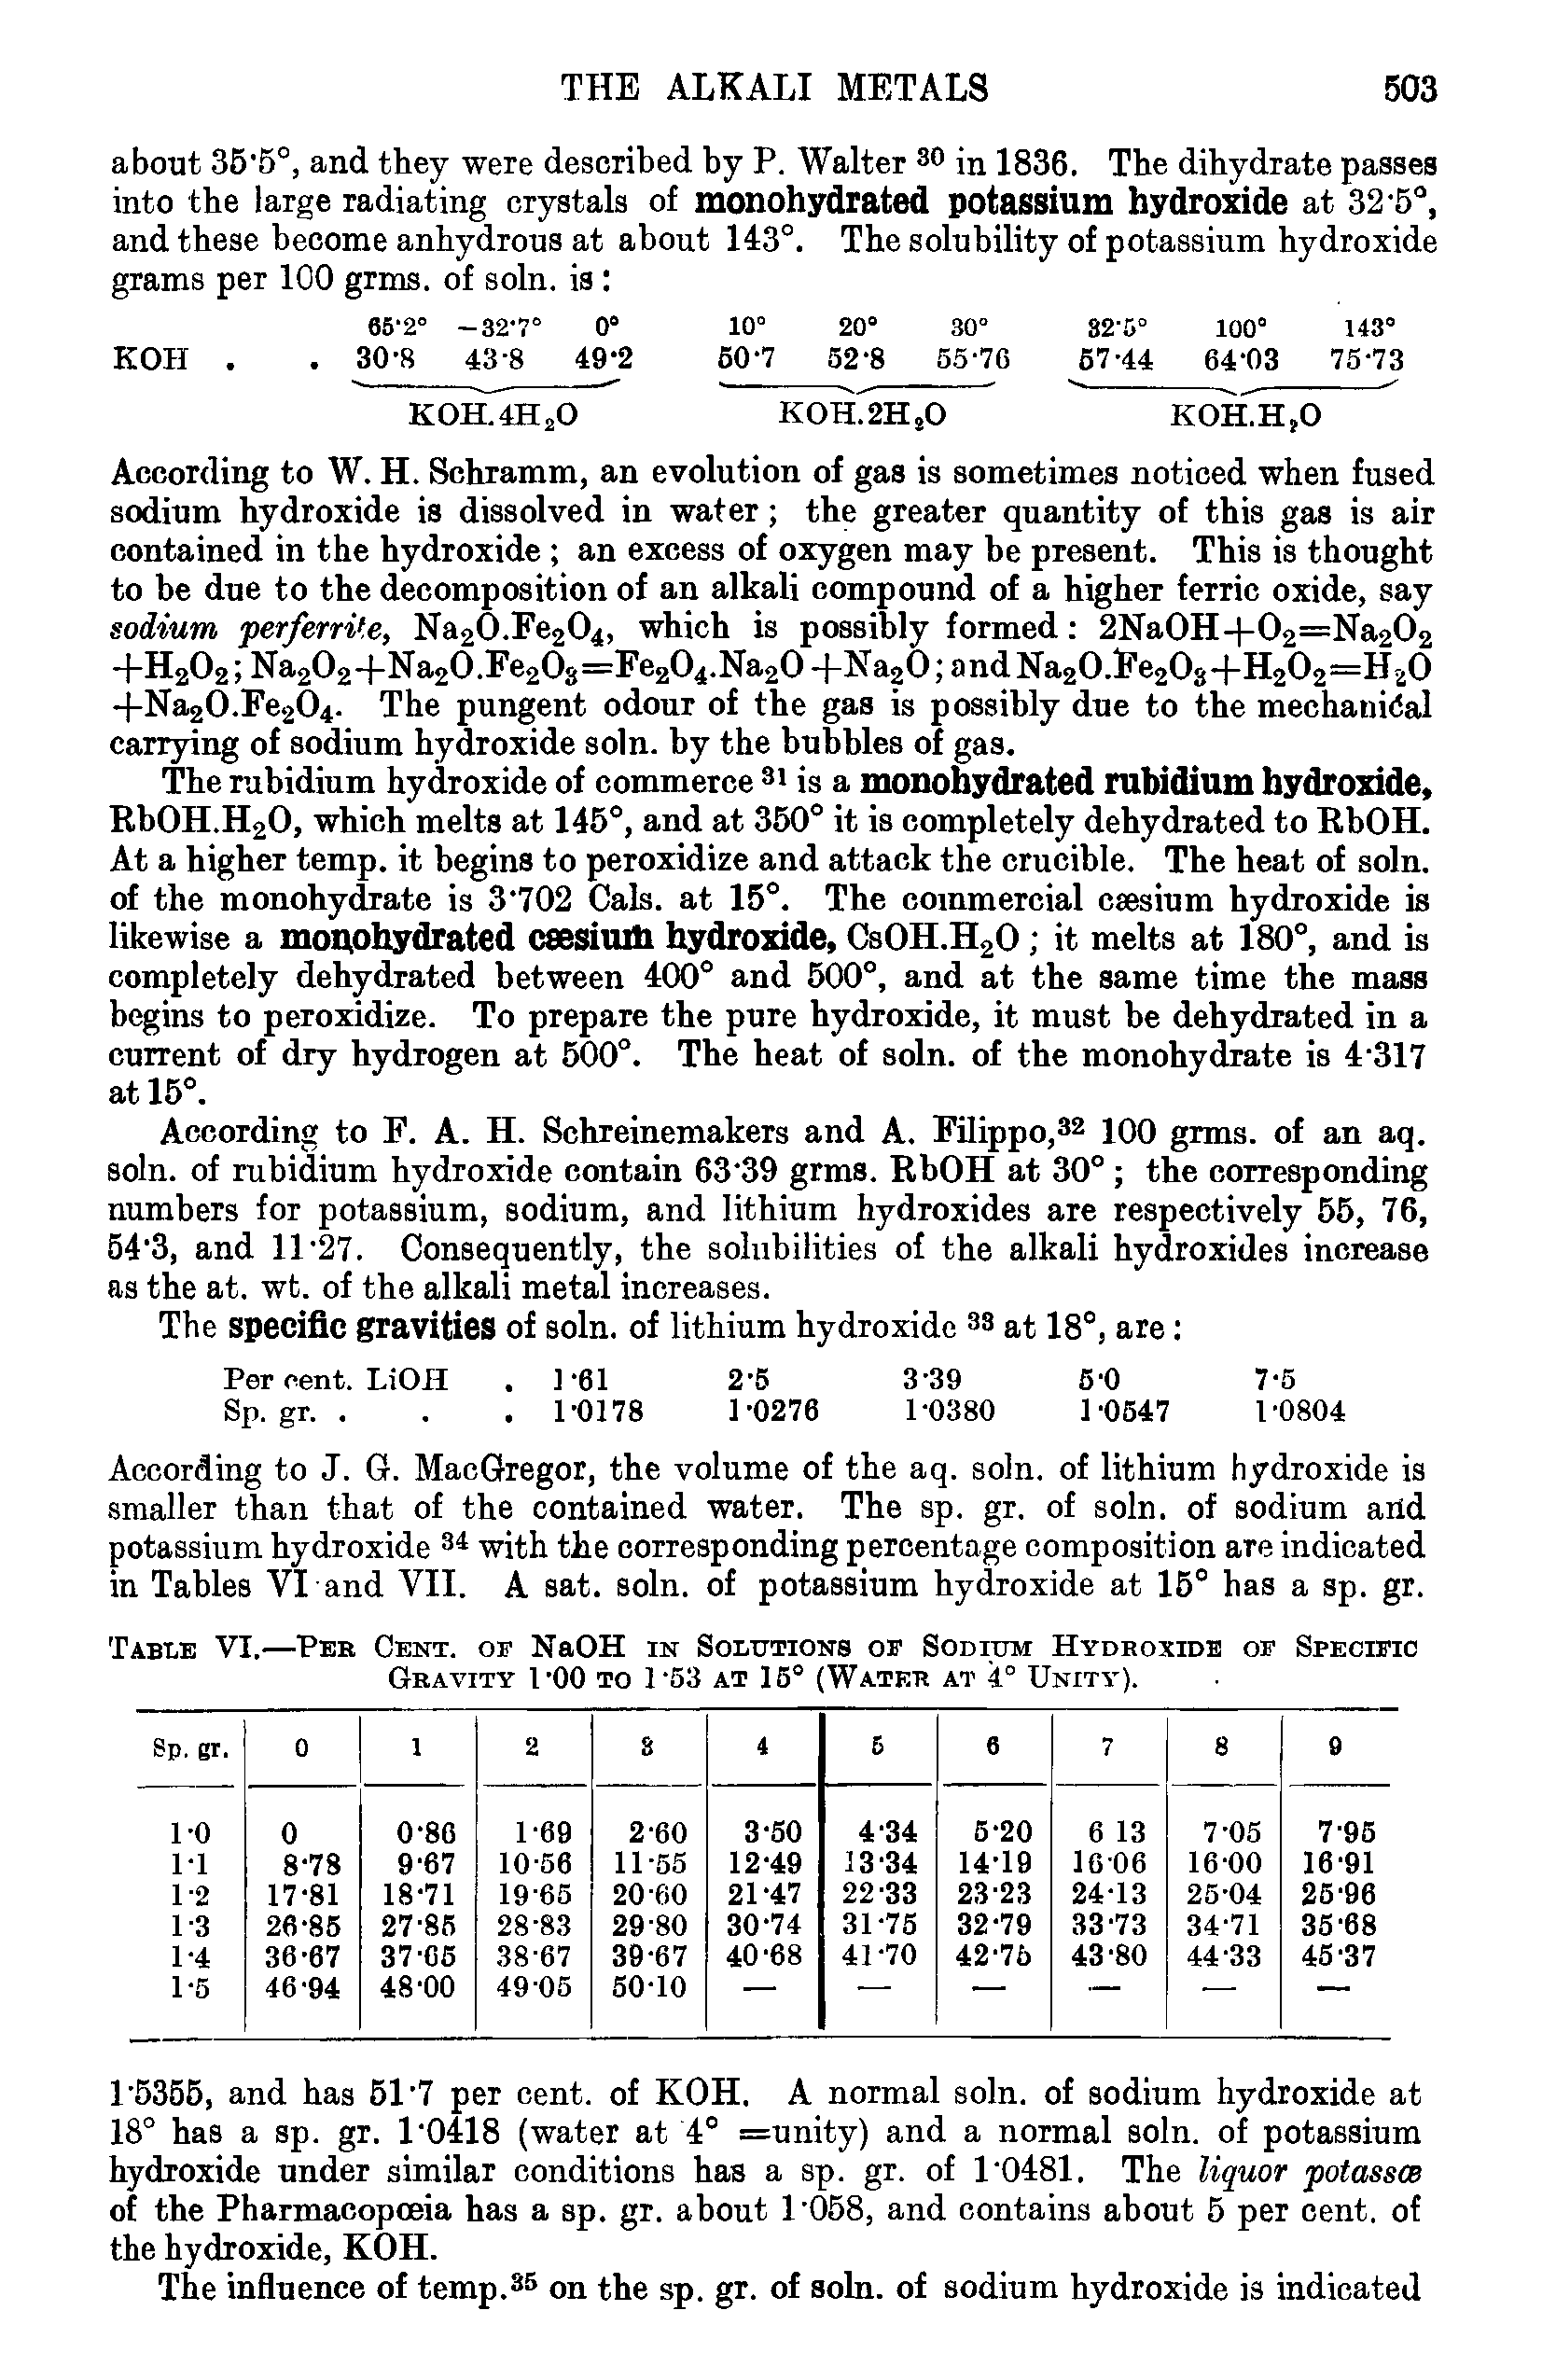 Table VI.—Per Cent, of NaOH in Solutions of Sodium Hydroxide of Specific Gravity l-00 to 1 53 at 15° (Water at 4° Unity).